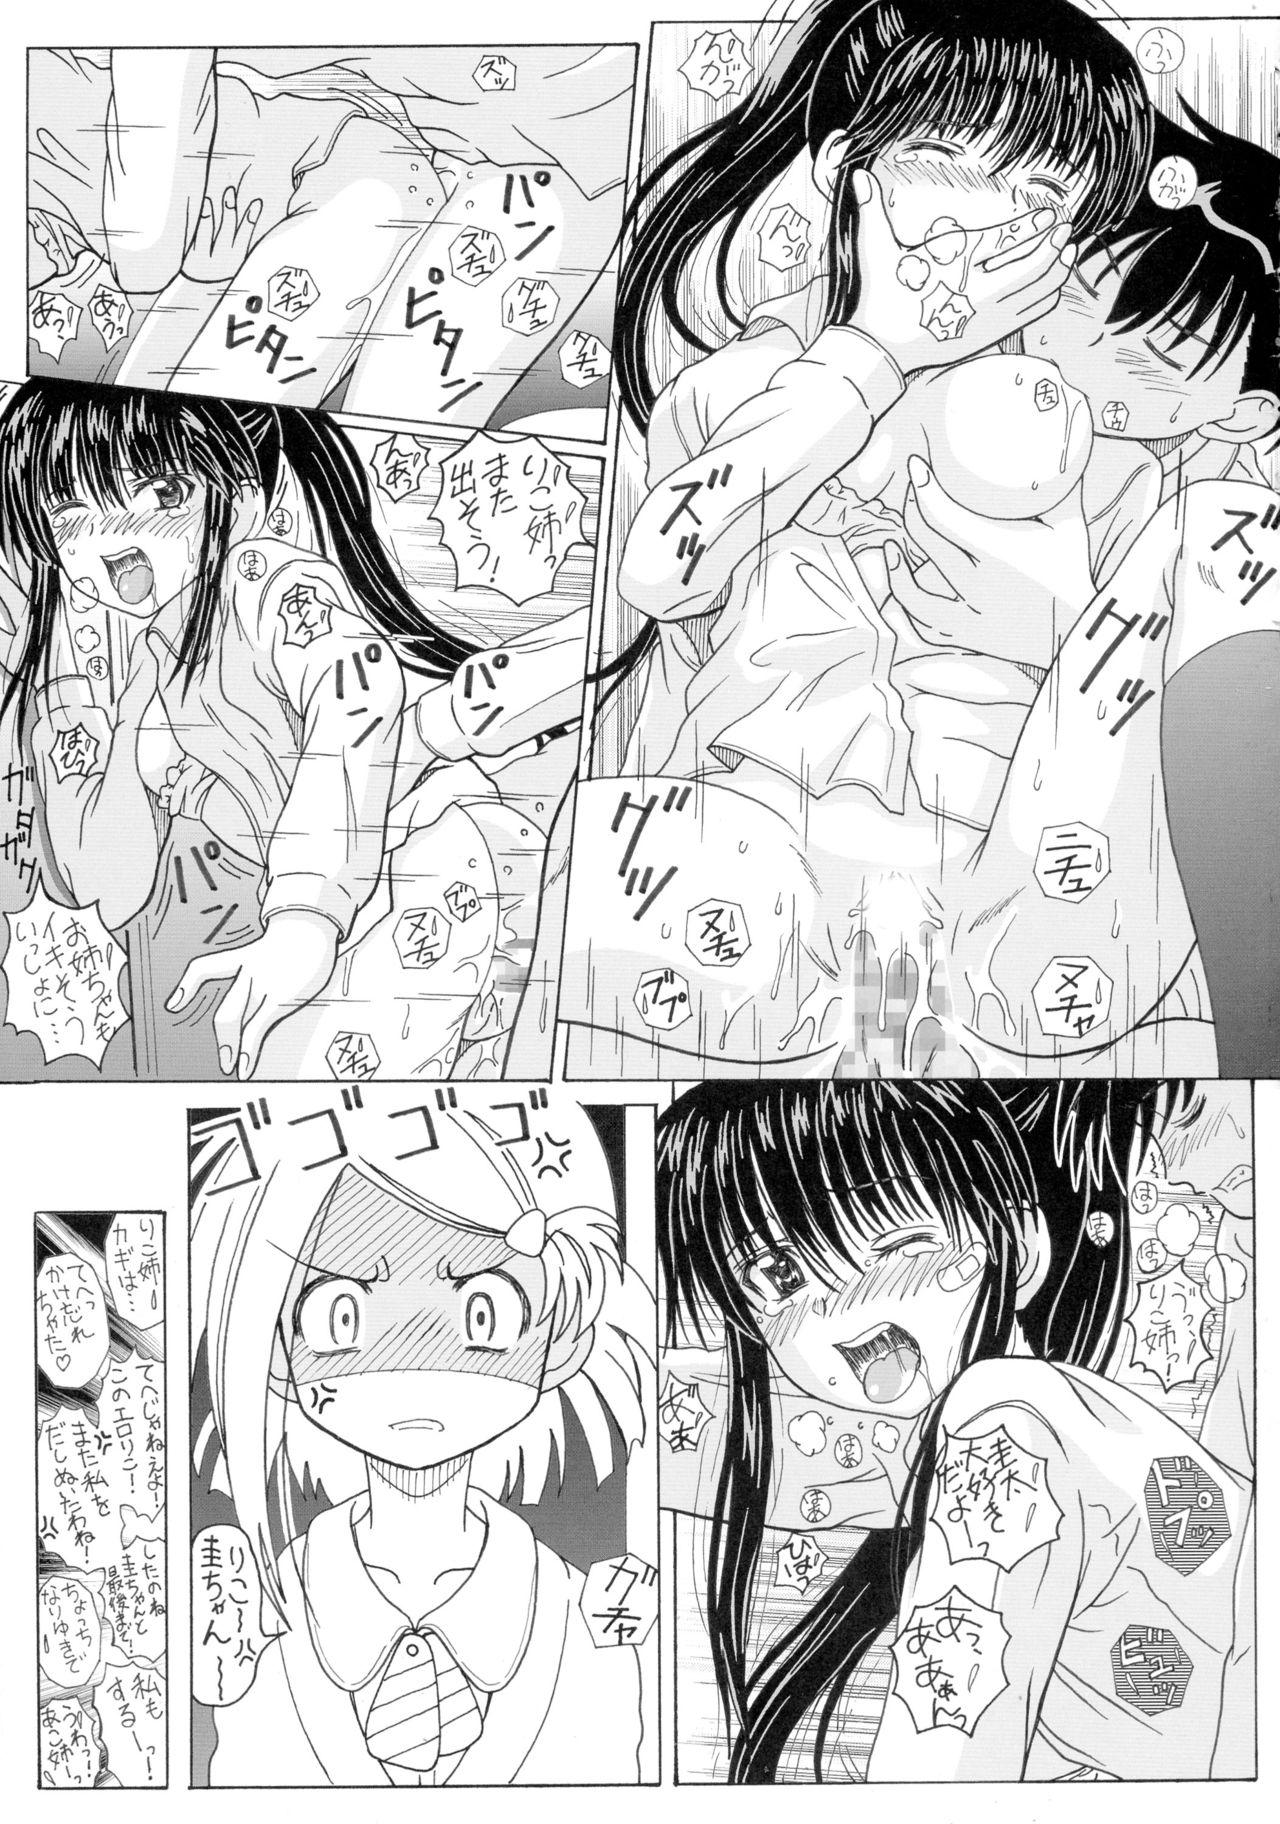 Calcinha The Onee-chans - Kiss x sis Amature - Page 25